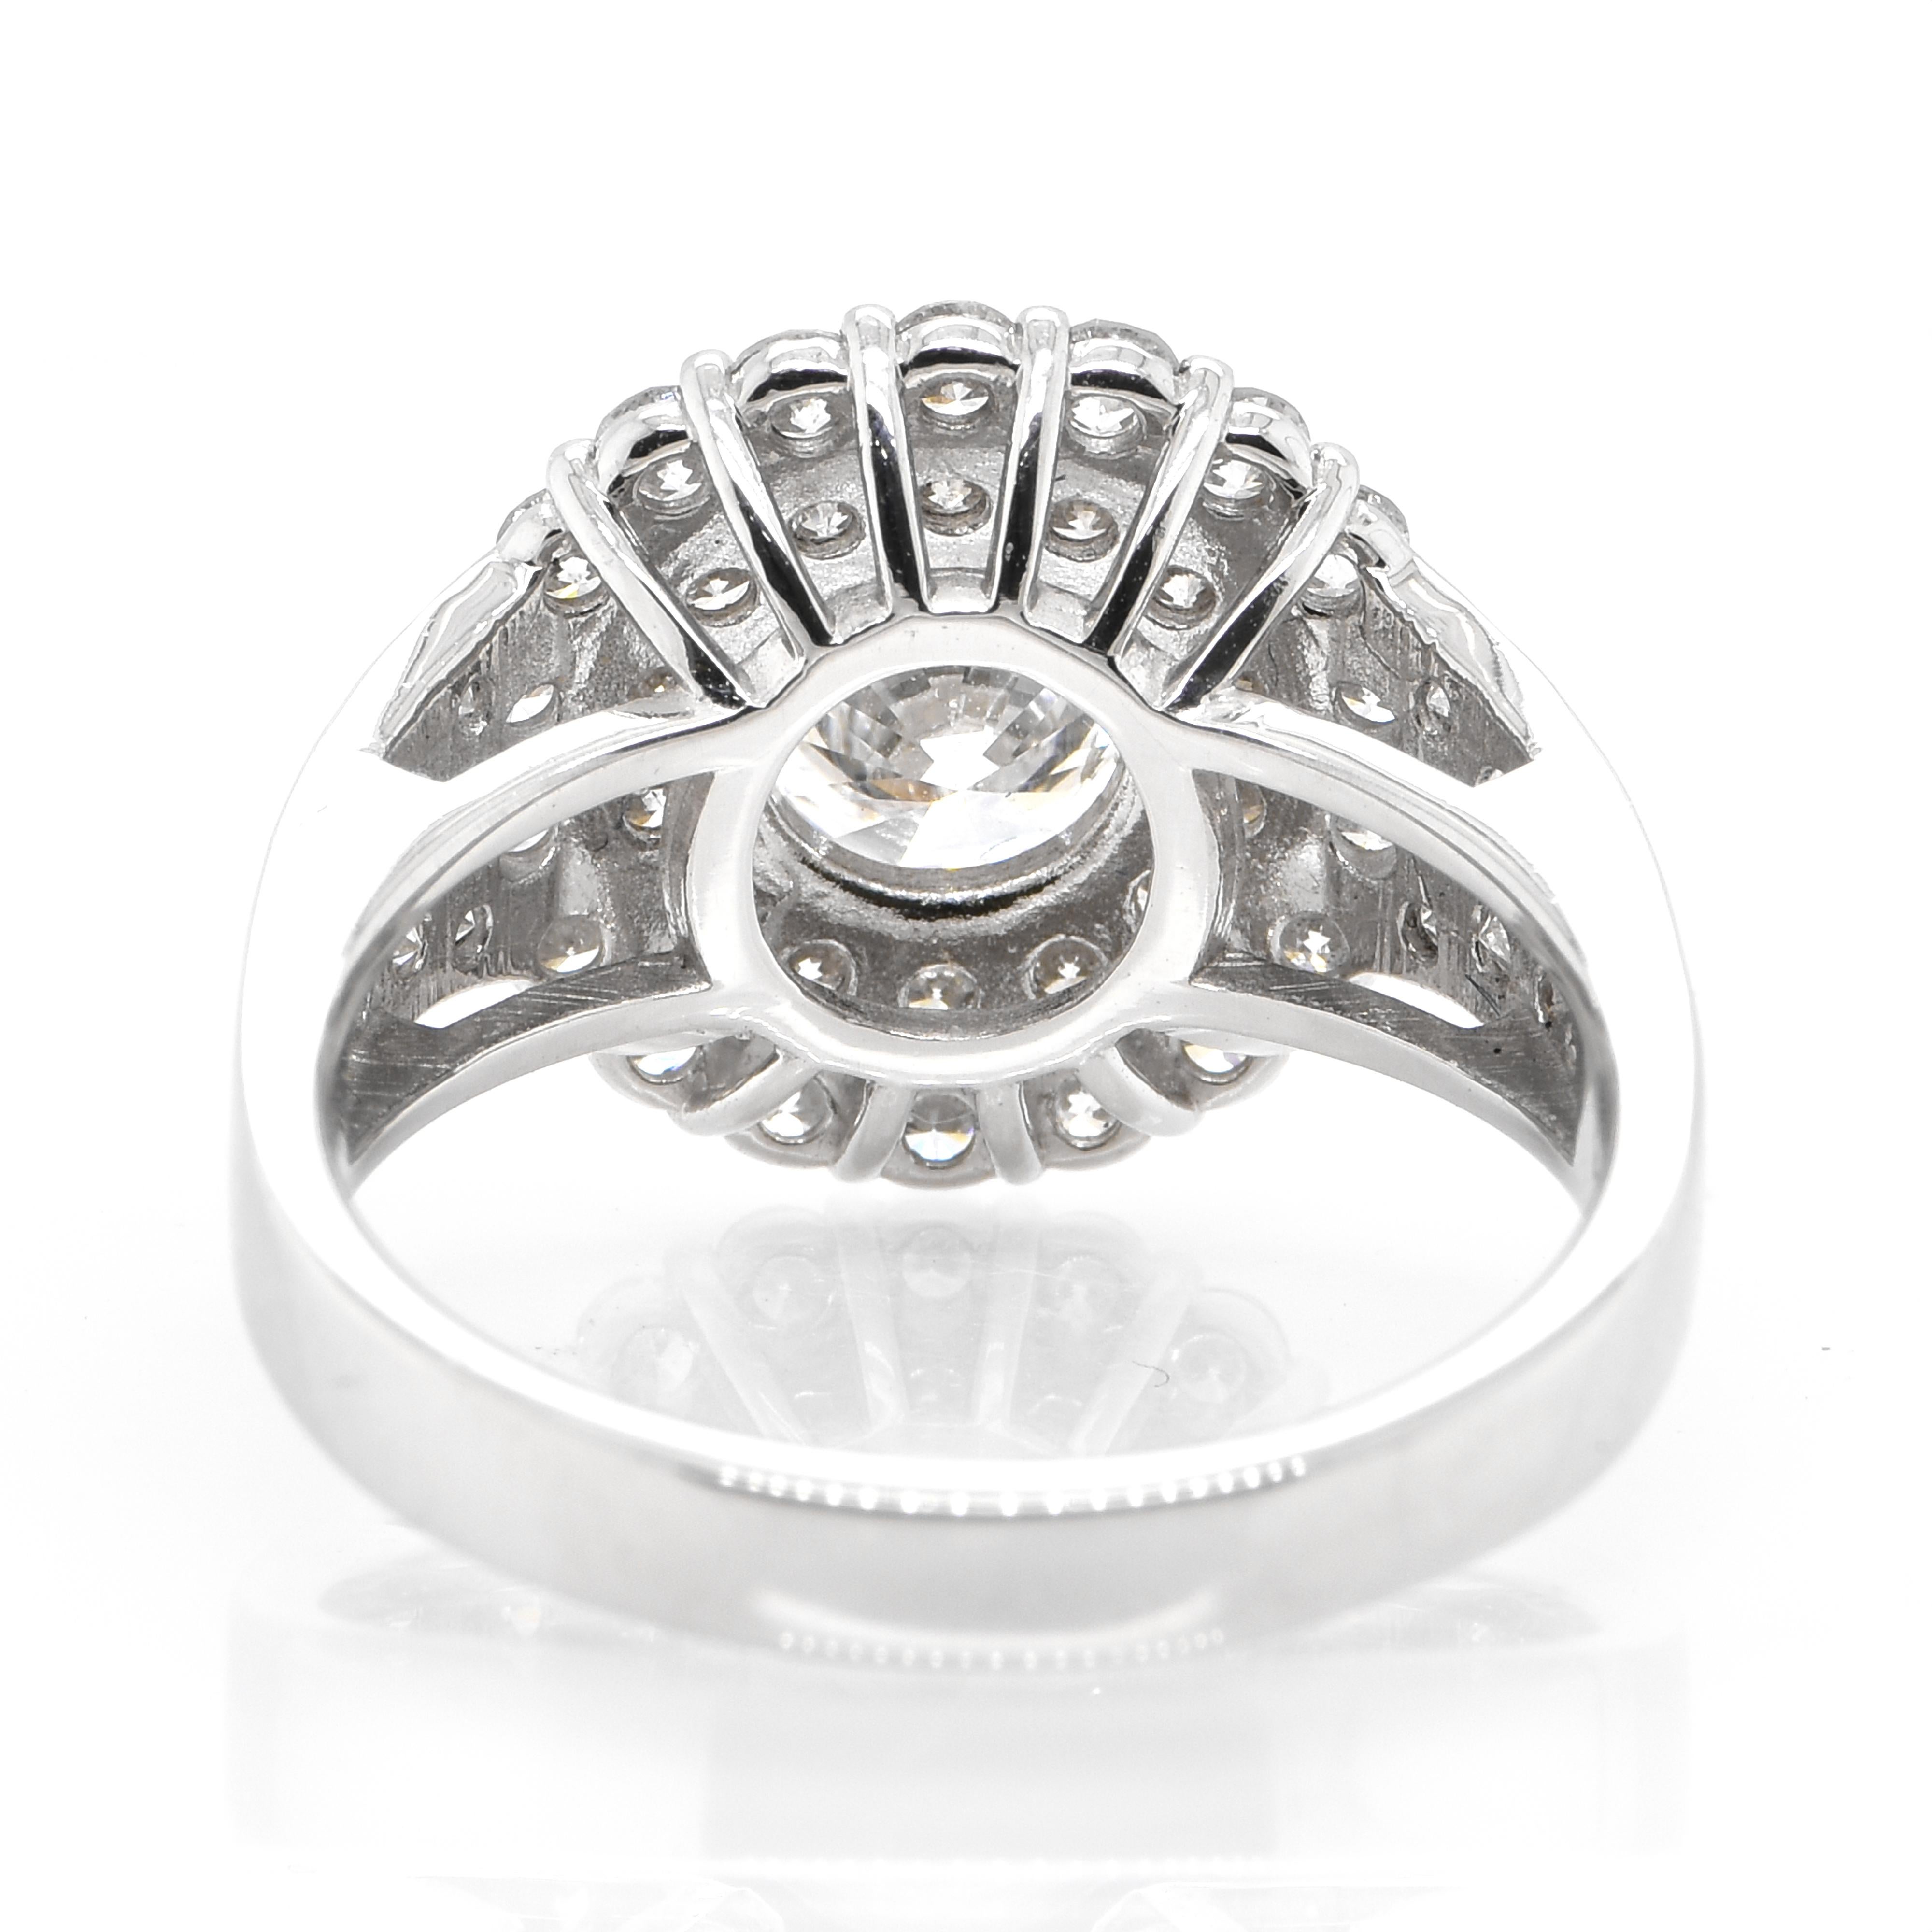 Women's 1.06 Carat, H Si-2, Earth-Mined Diamond Cocktail Ring made in Platinum For Sale